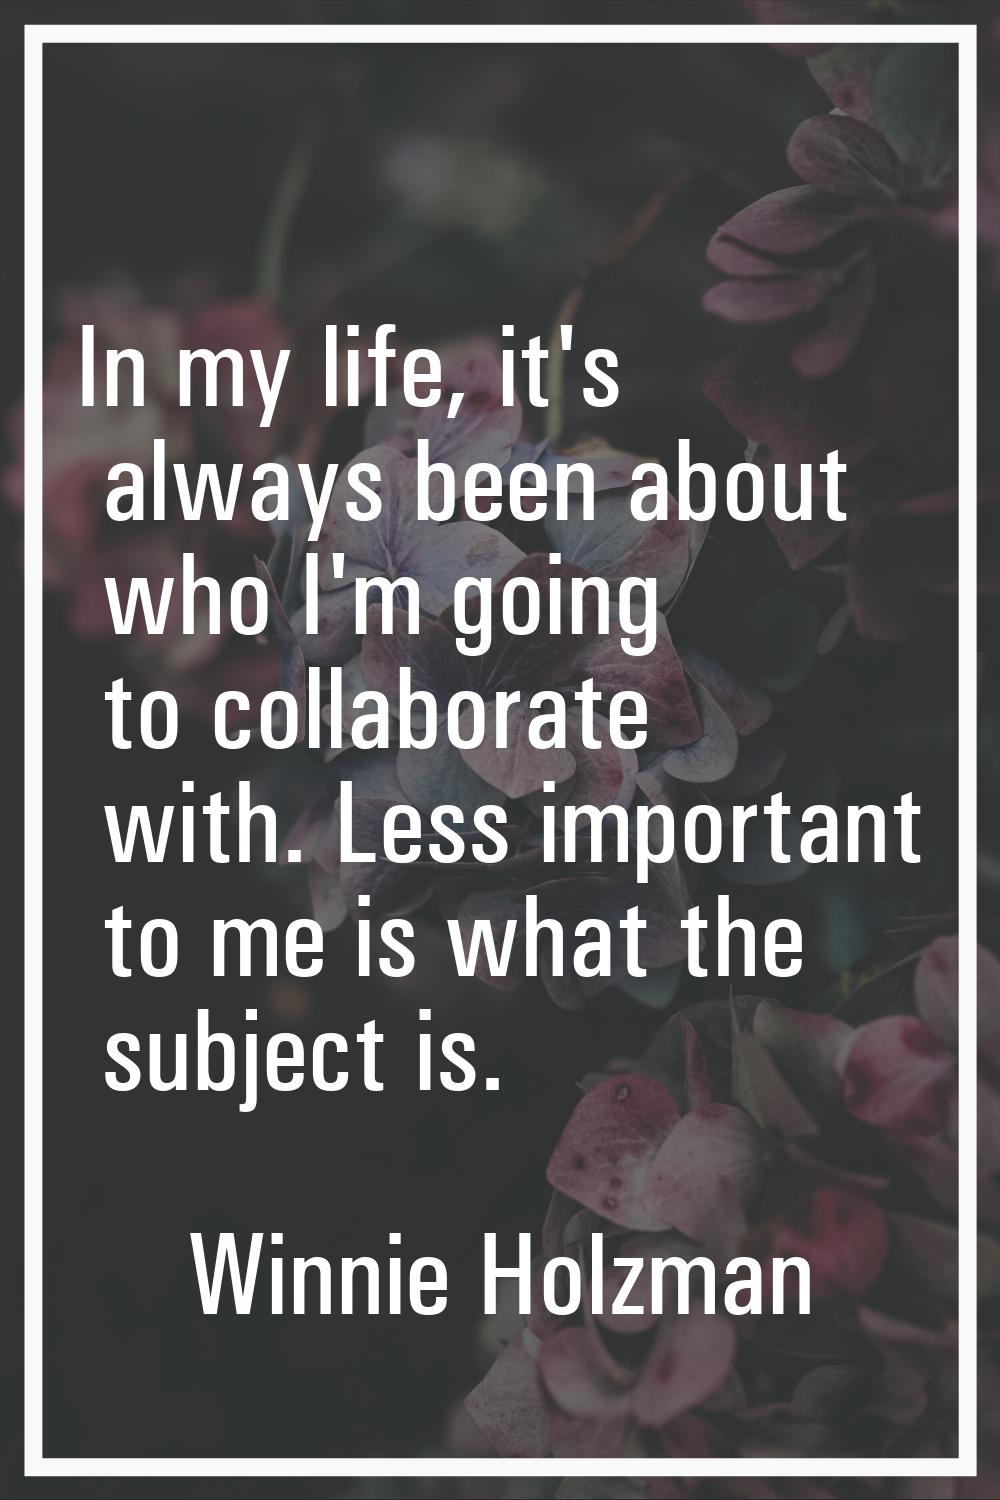 In my life, it's always been about who I'm going to collaborate with. Less important to me is what 